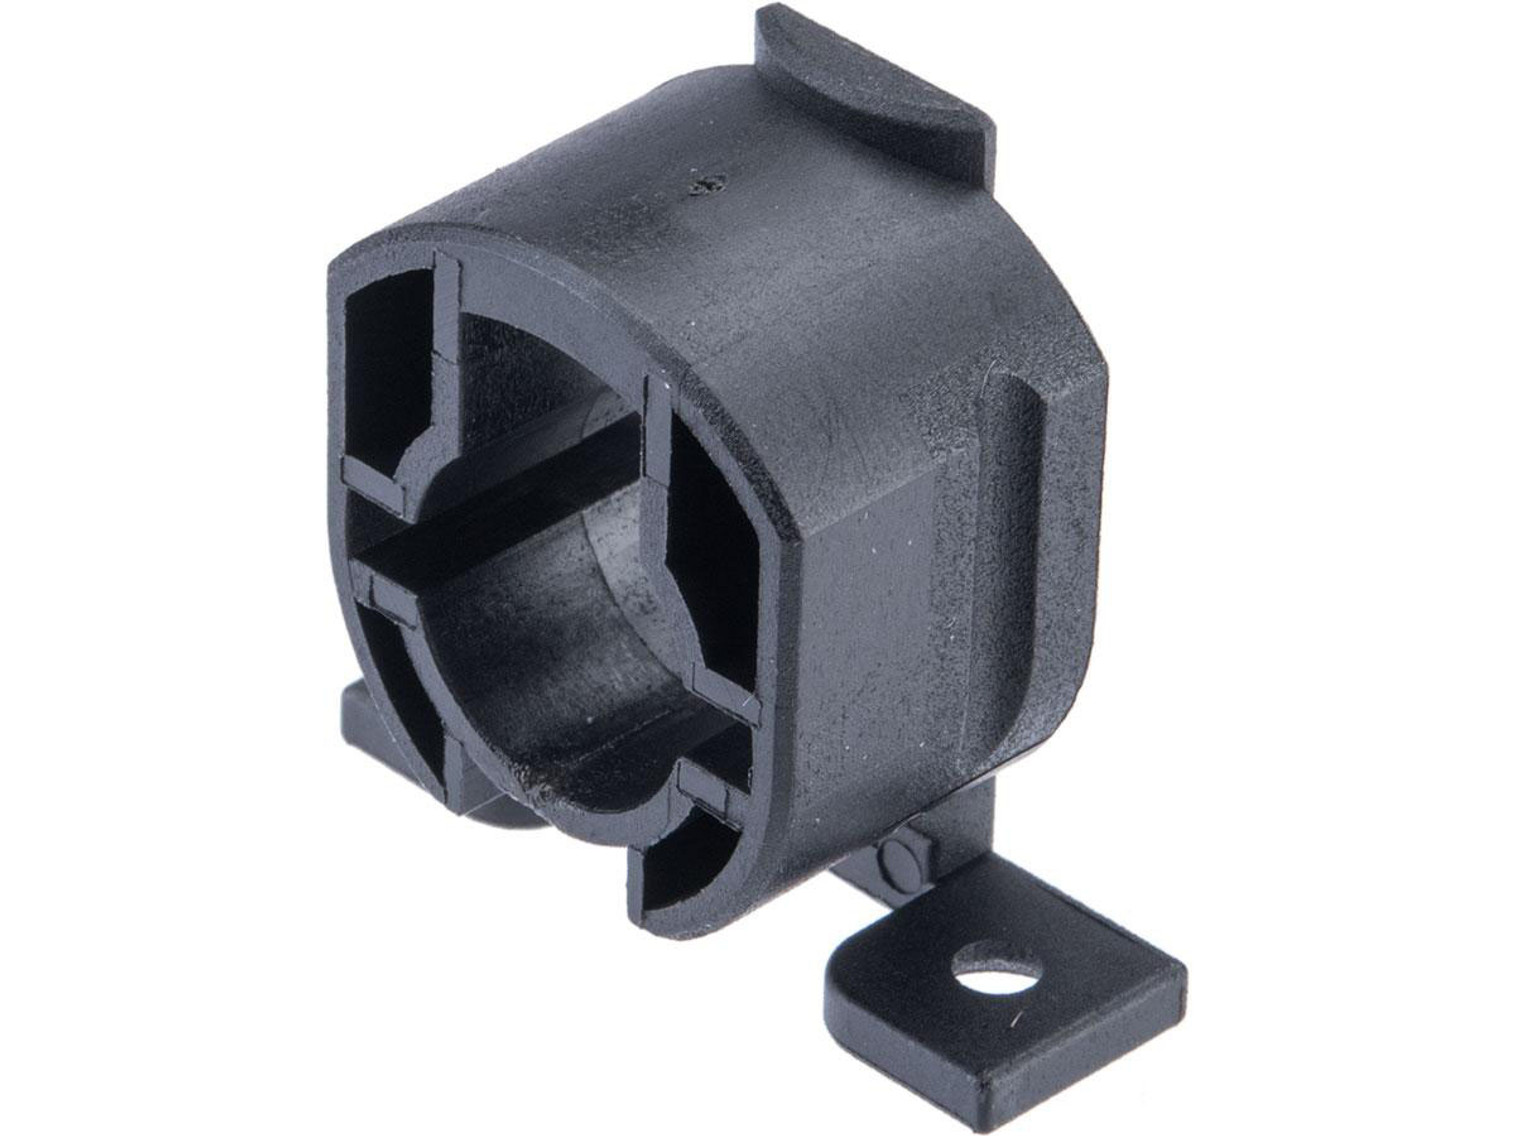 VFC Replacement Hop-Up Base and Screw Set for Sig Sauer ProForce MCX Virtus Airsoft AEG Rifles